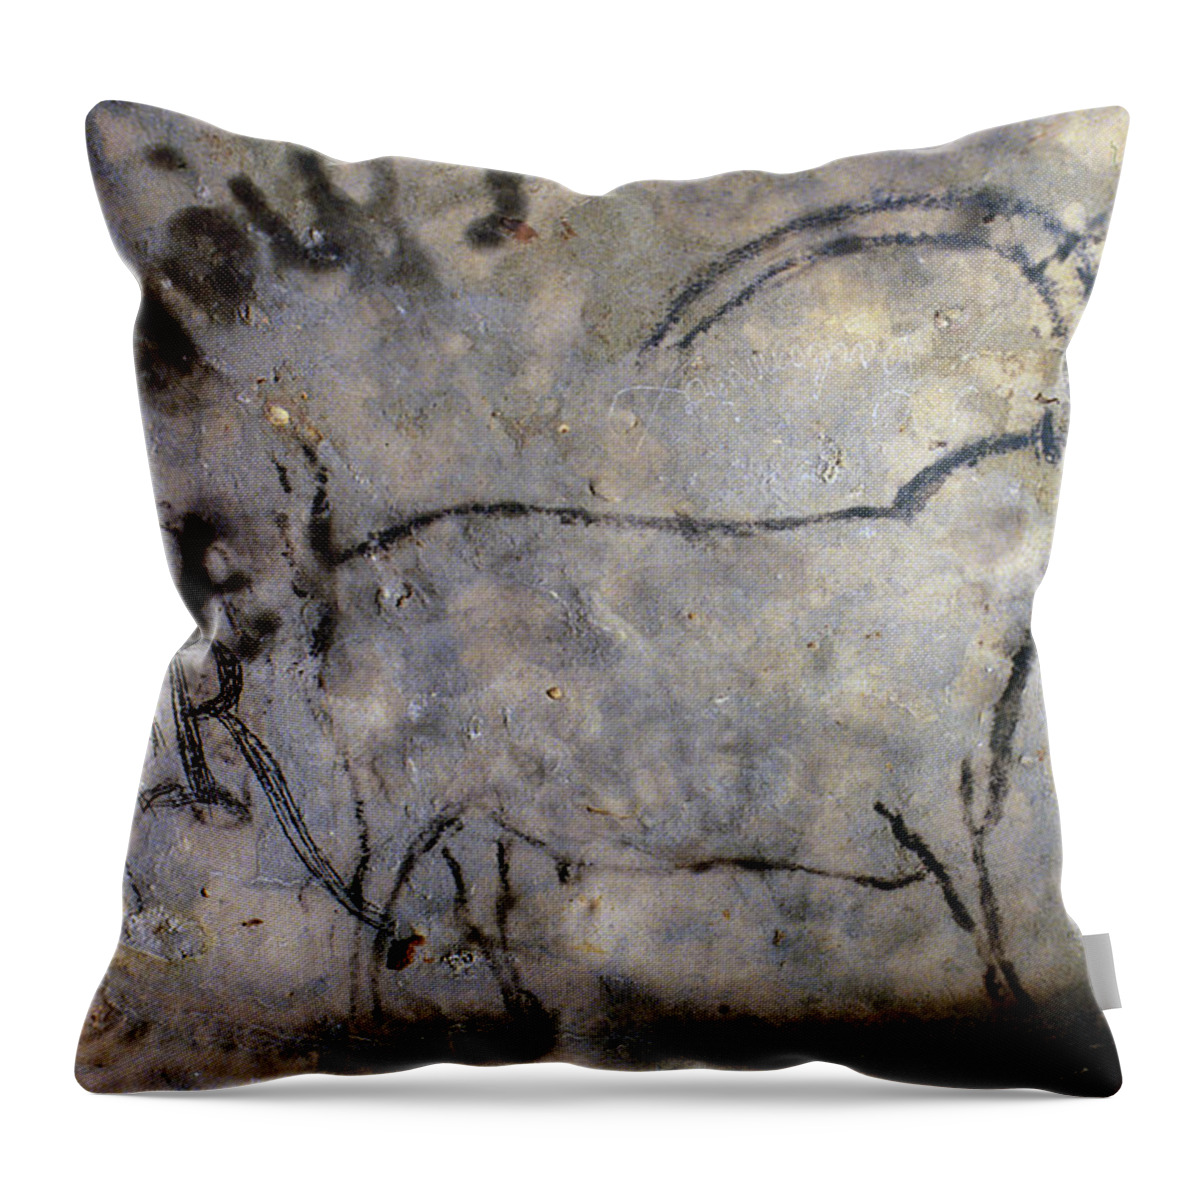 10 Throw Pillow featuring the photograph Cave Art: Ibex by Granger